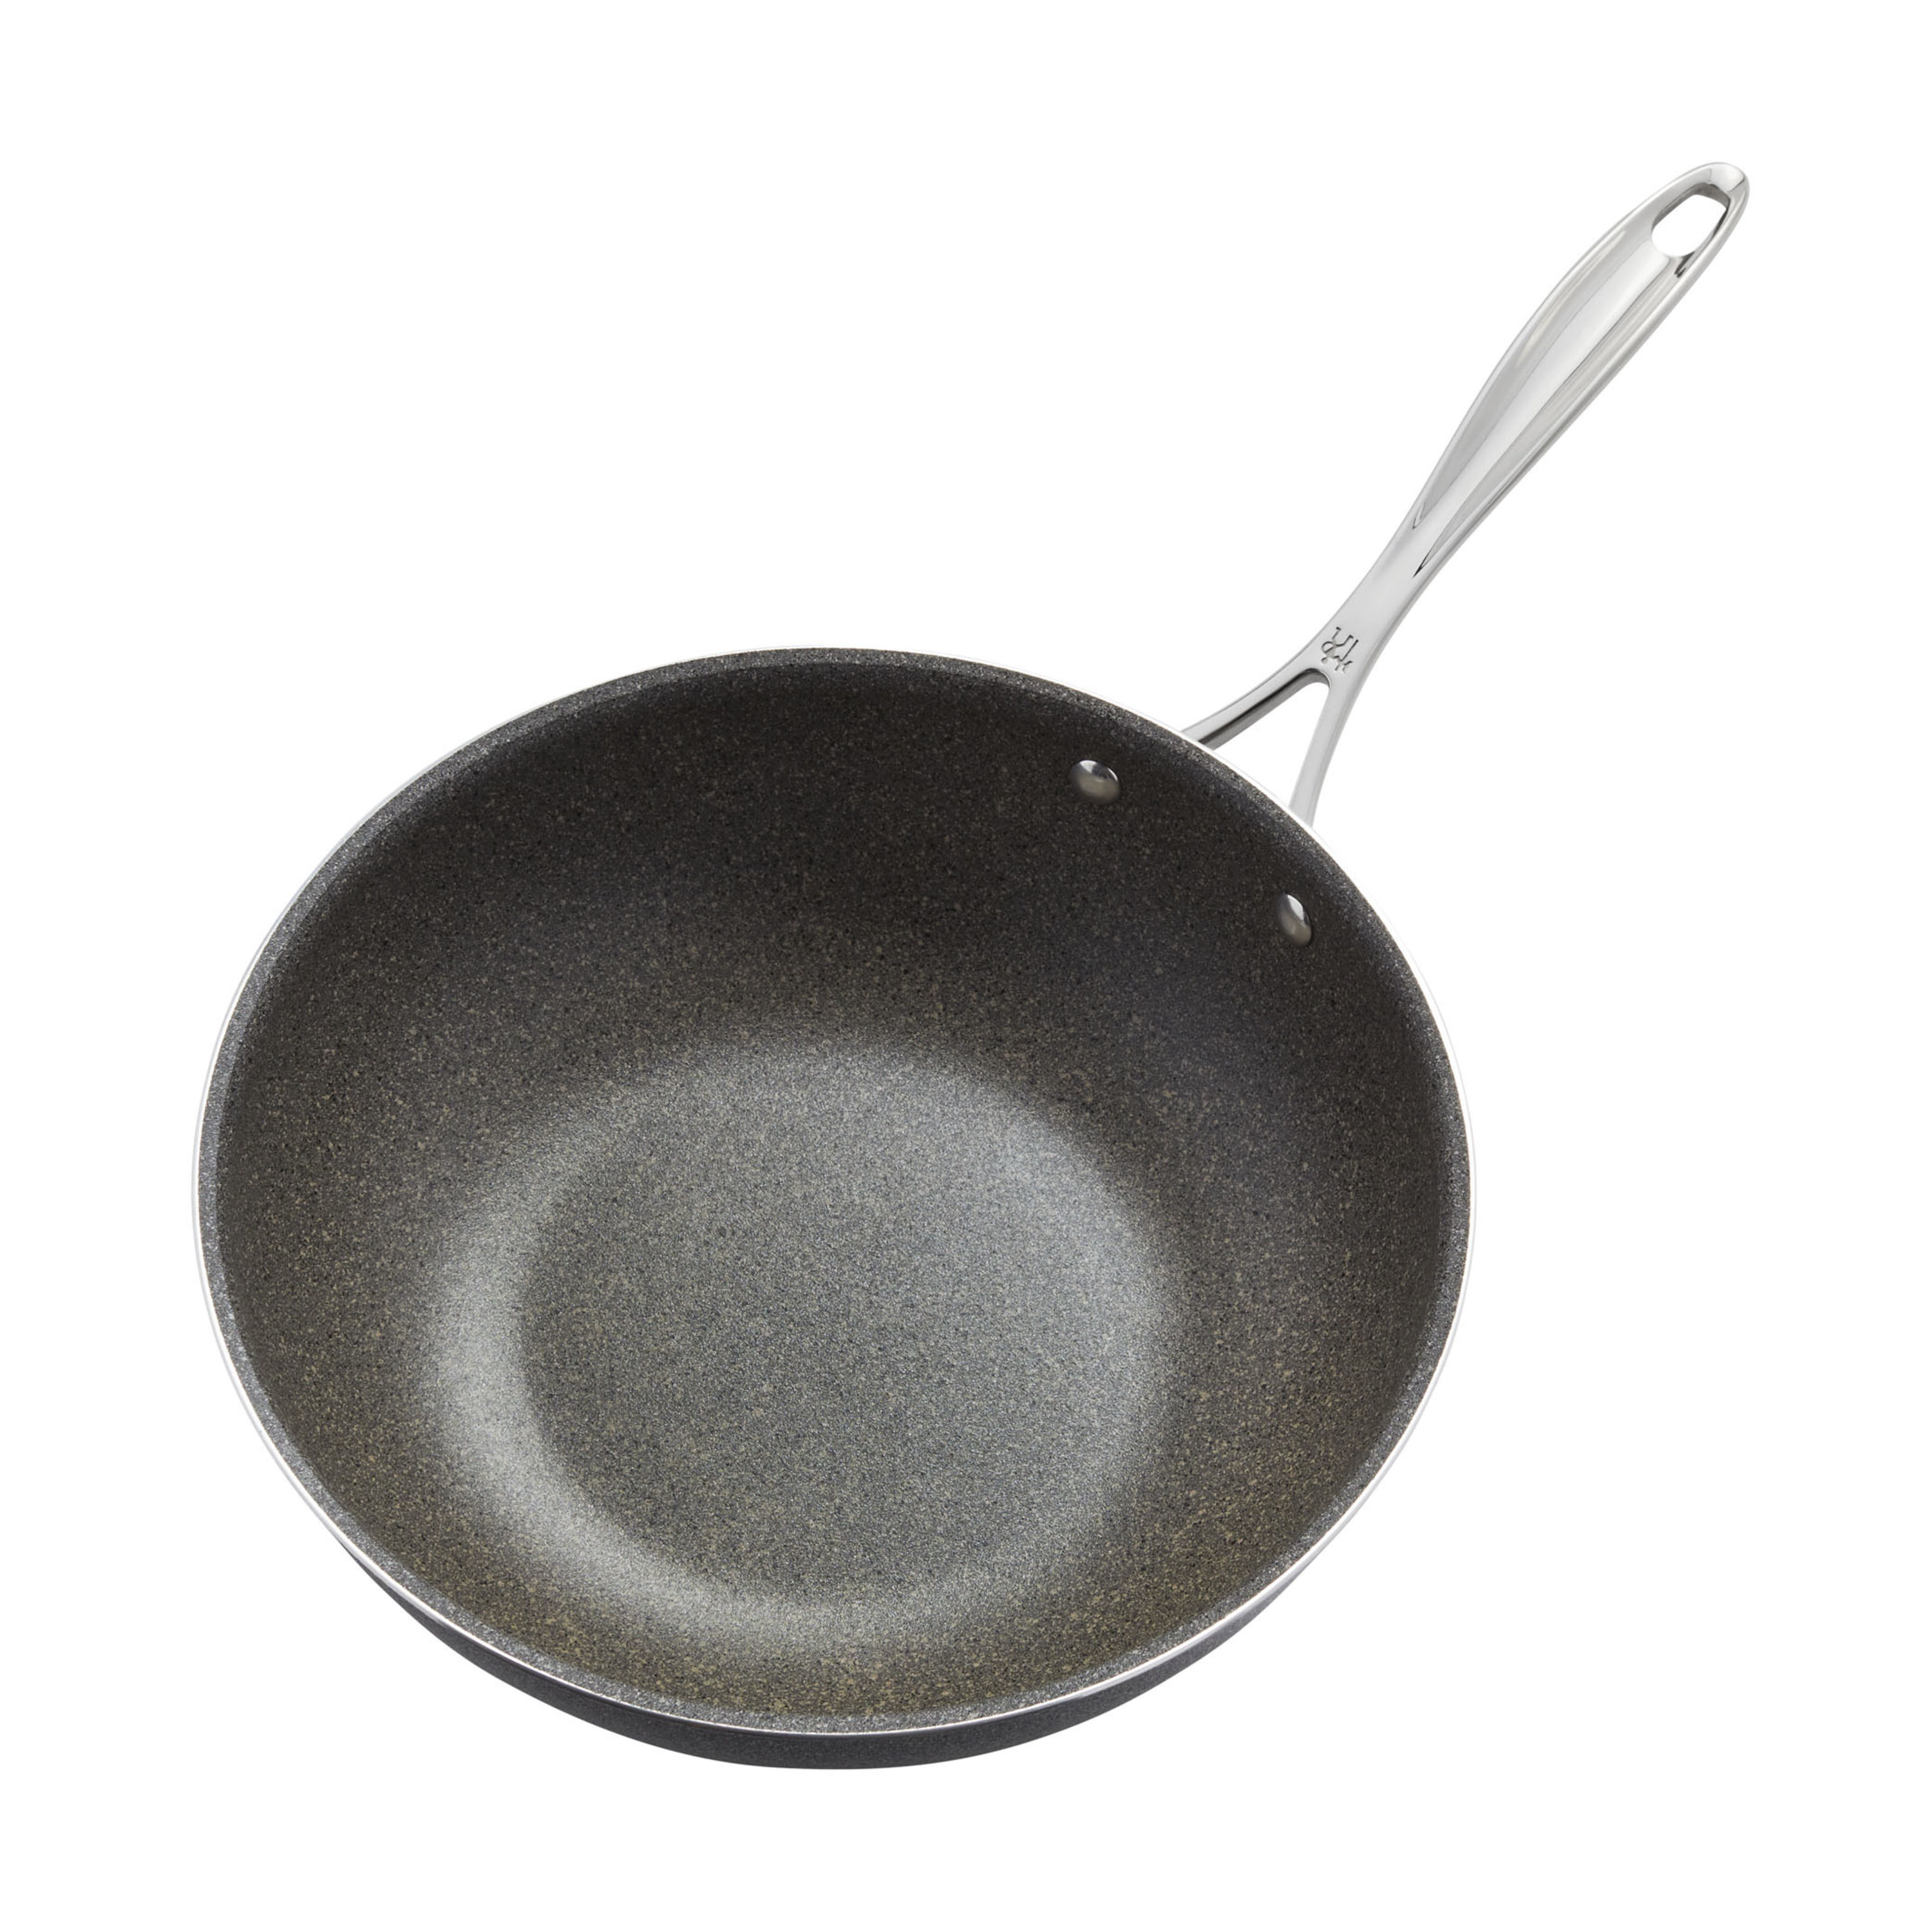 11 Grey Non Stick Granite Stone Frying Pan with Lid, Toxin-Free